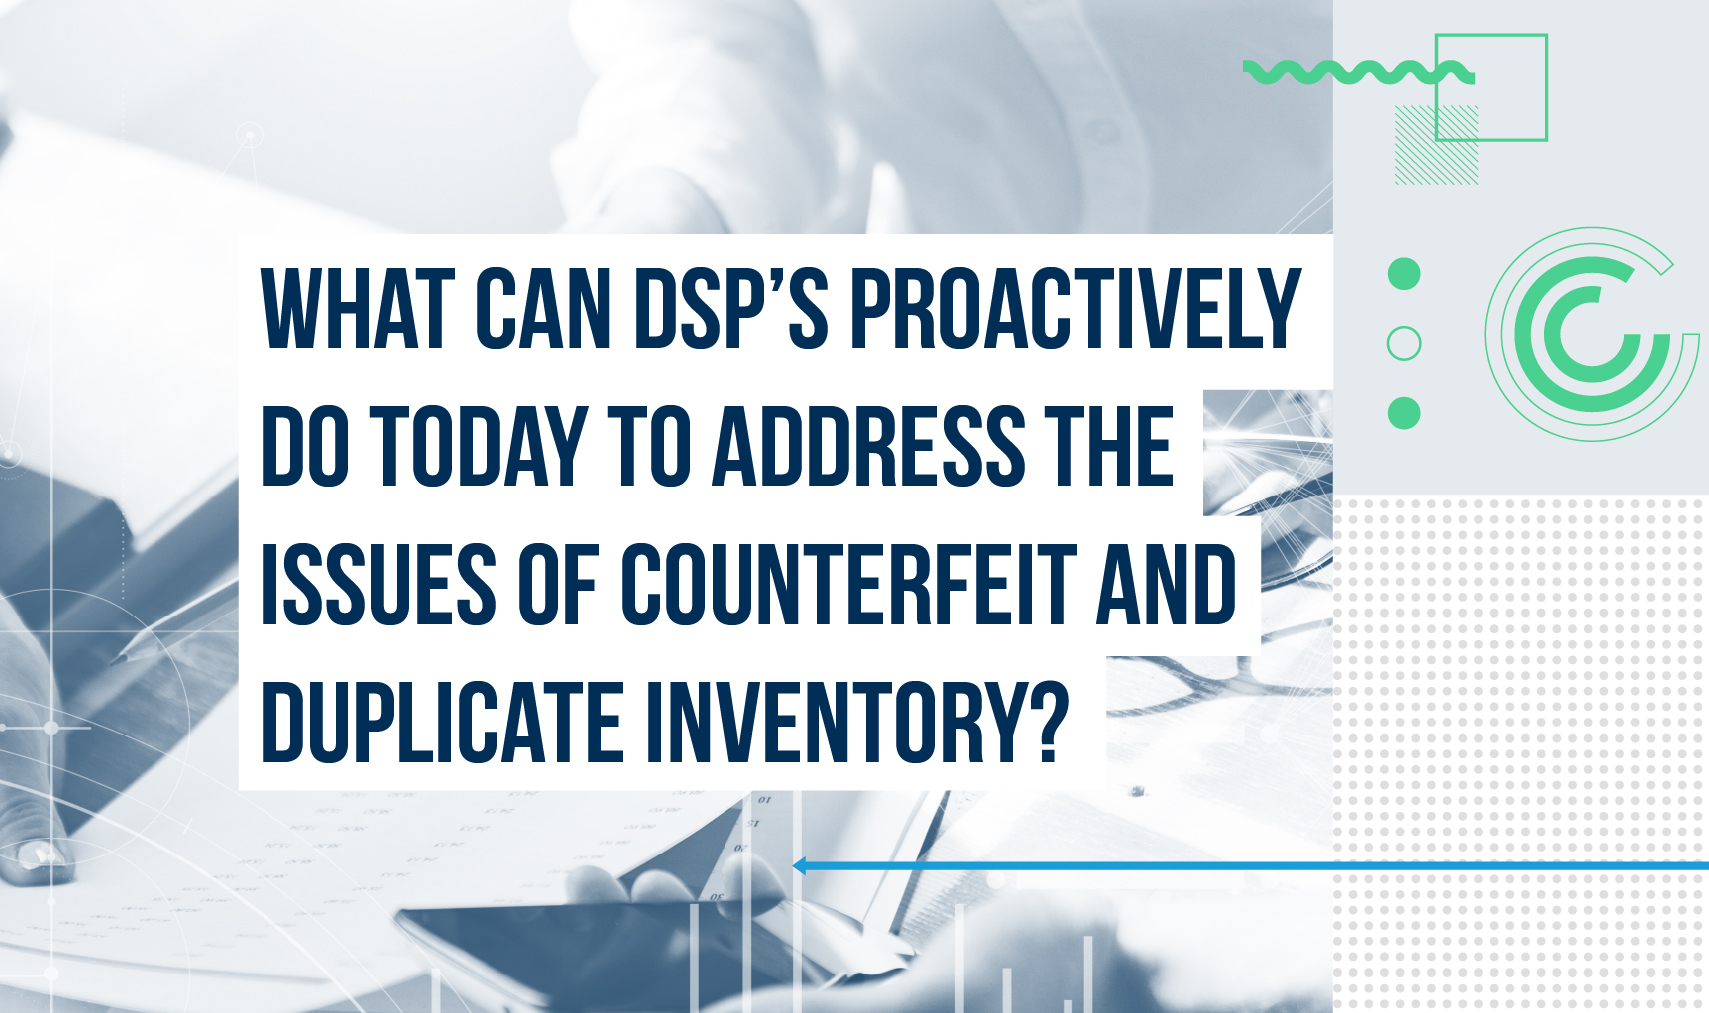 What can DSP’s proactively do today to address the issues of counterfeit and duplicate inventory? Cover